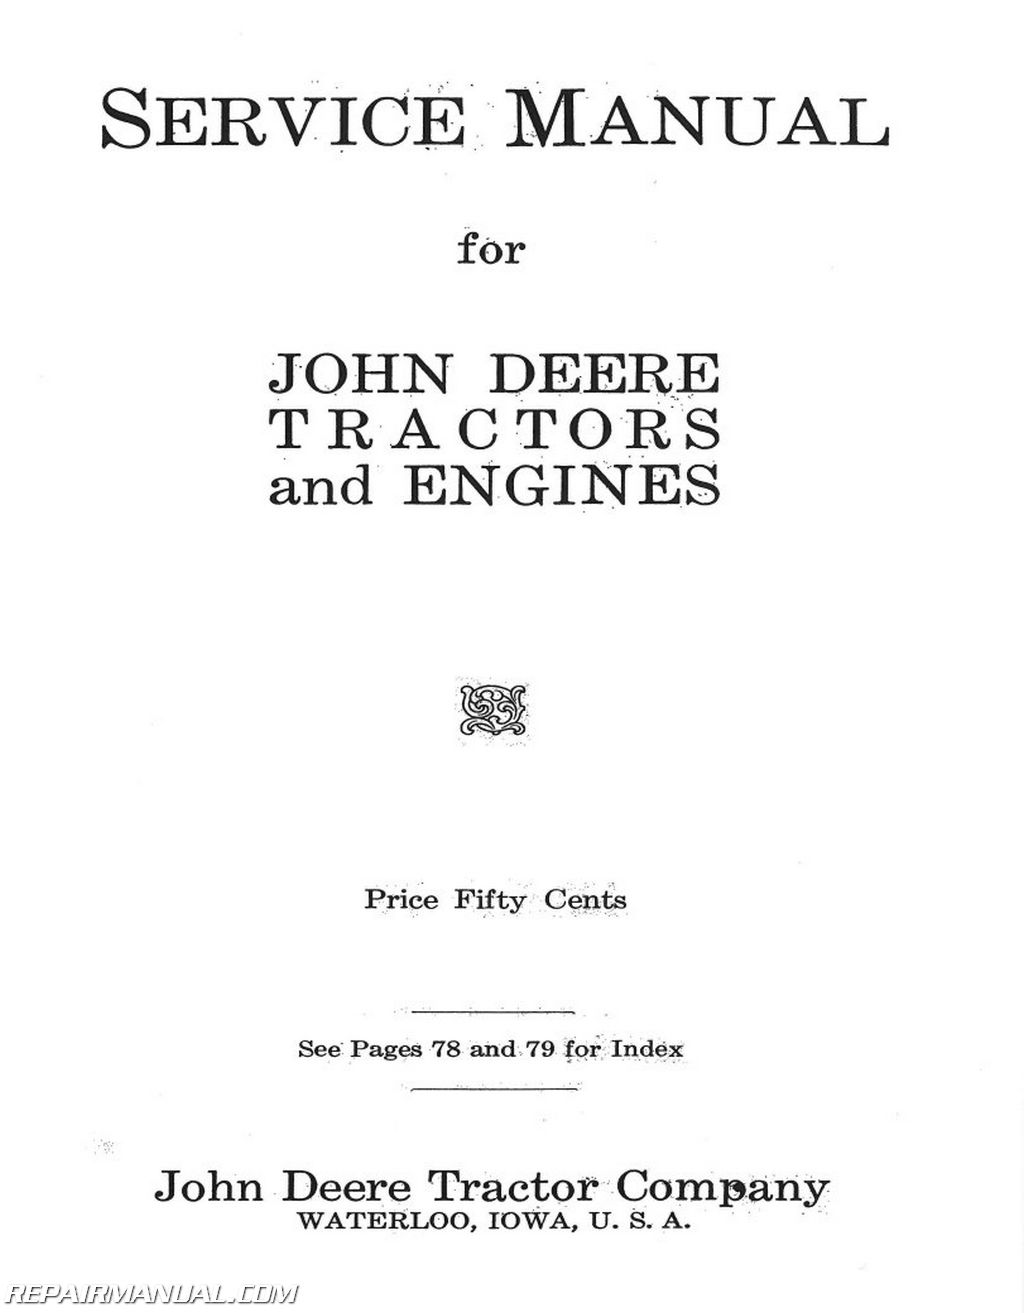 SERVICE OPERATORS MANUAL for JOHN DEERE A UNSTYLED TRACTOR GENERAL PURPOSE OWNER 